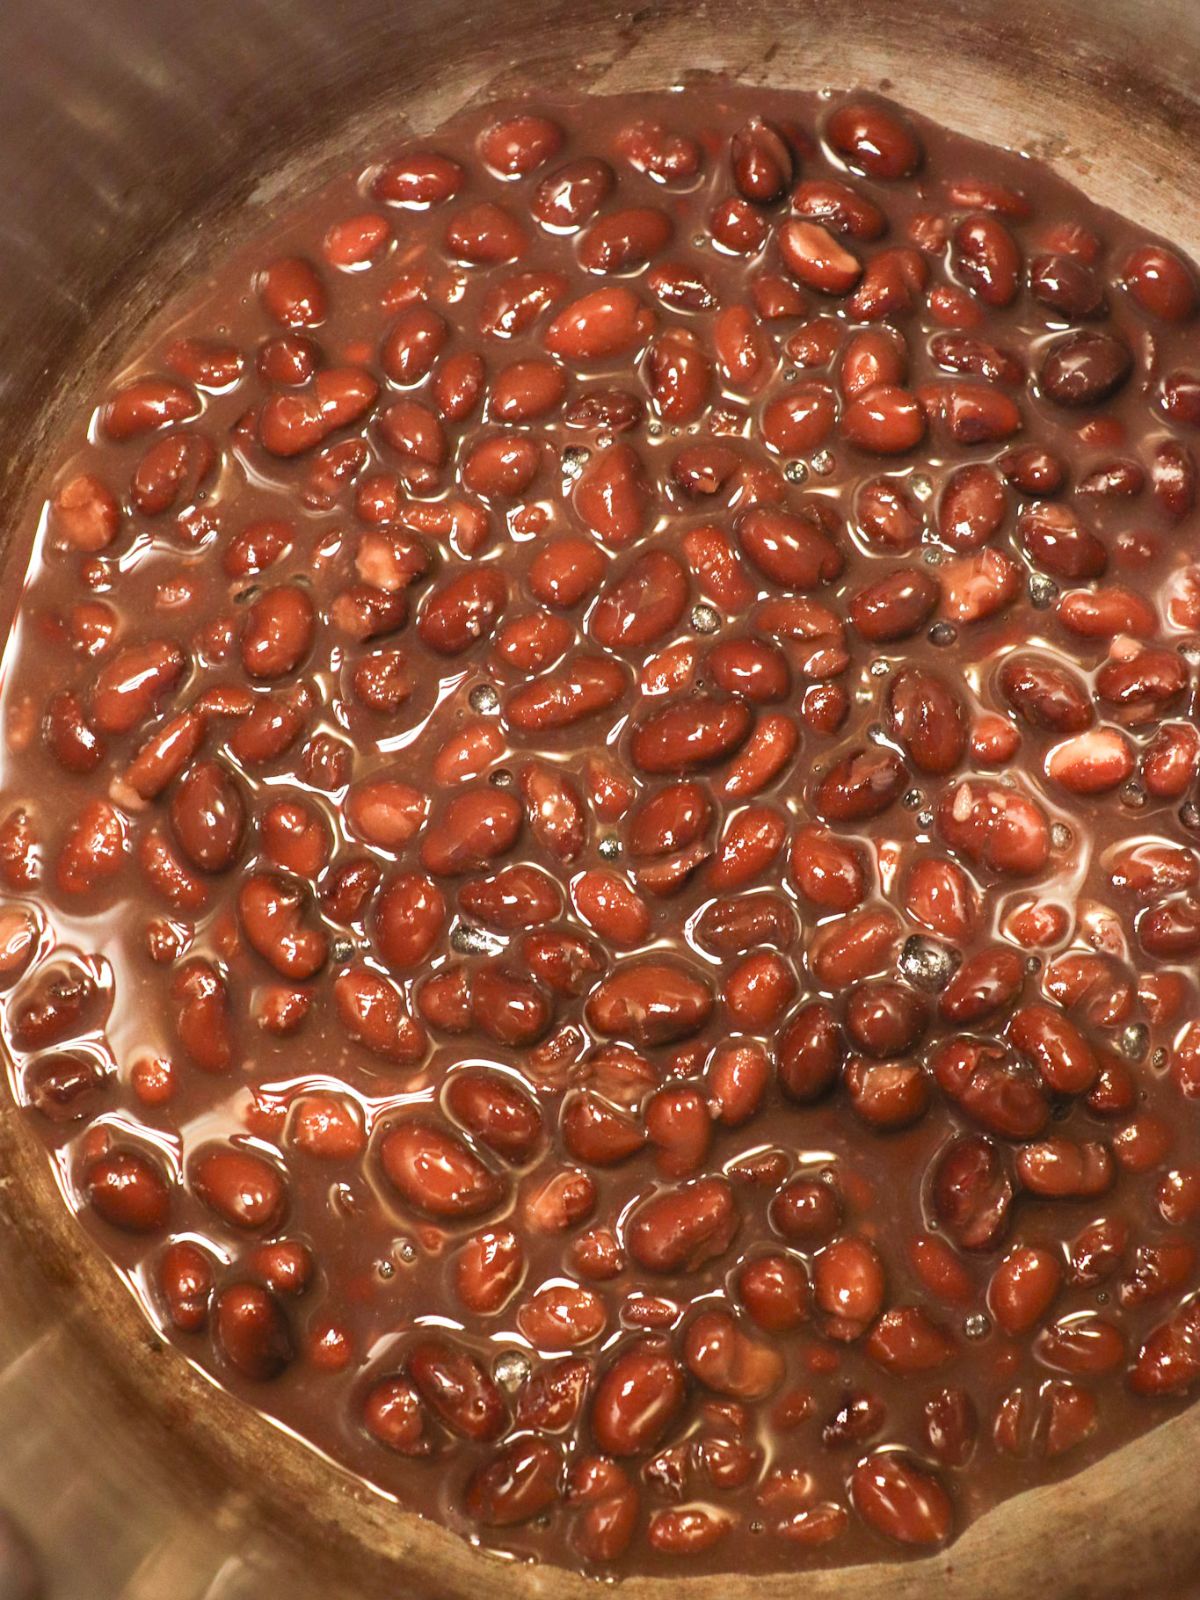 Black beans warming up in a pan on a stove.